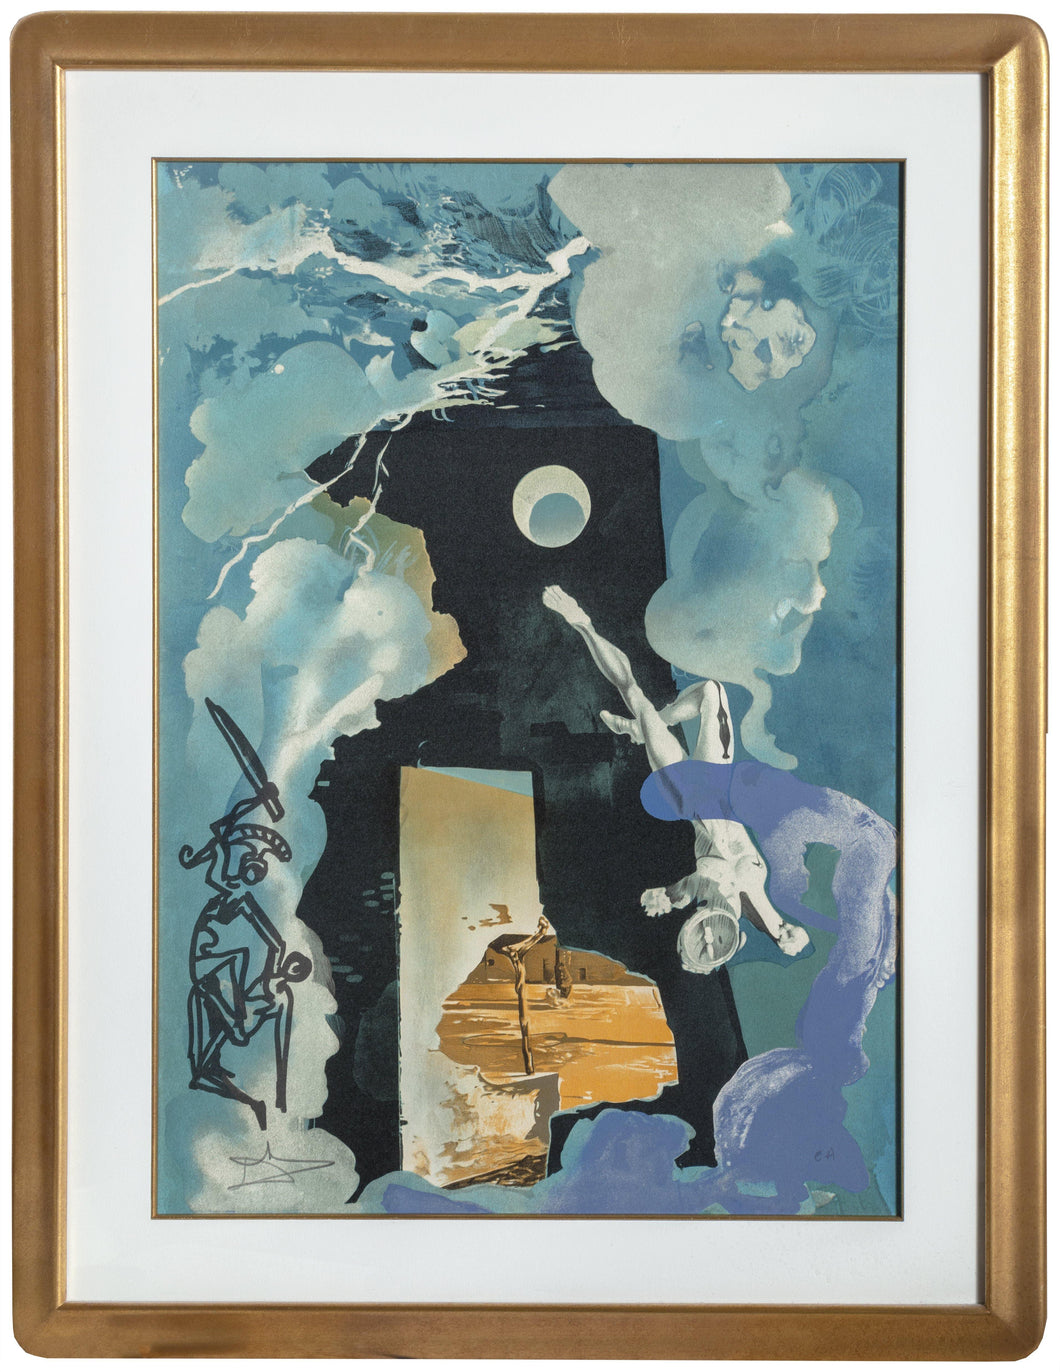 Eternity of Love (The Tower) Lithograph | Salvador Dalí,{{product.type}}